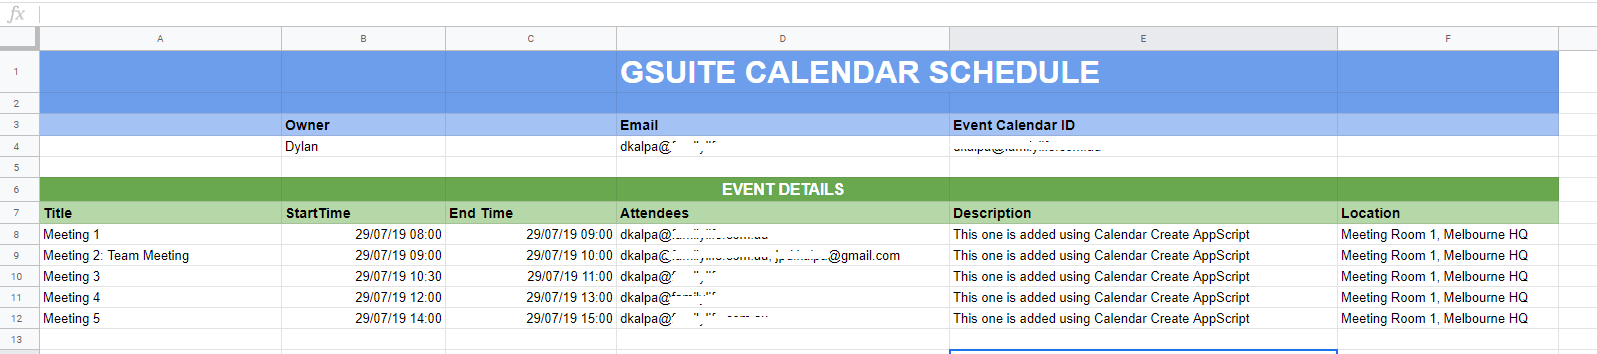 creating-calendar-events-using-google-sheets-data-with-appscript